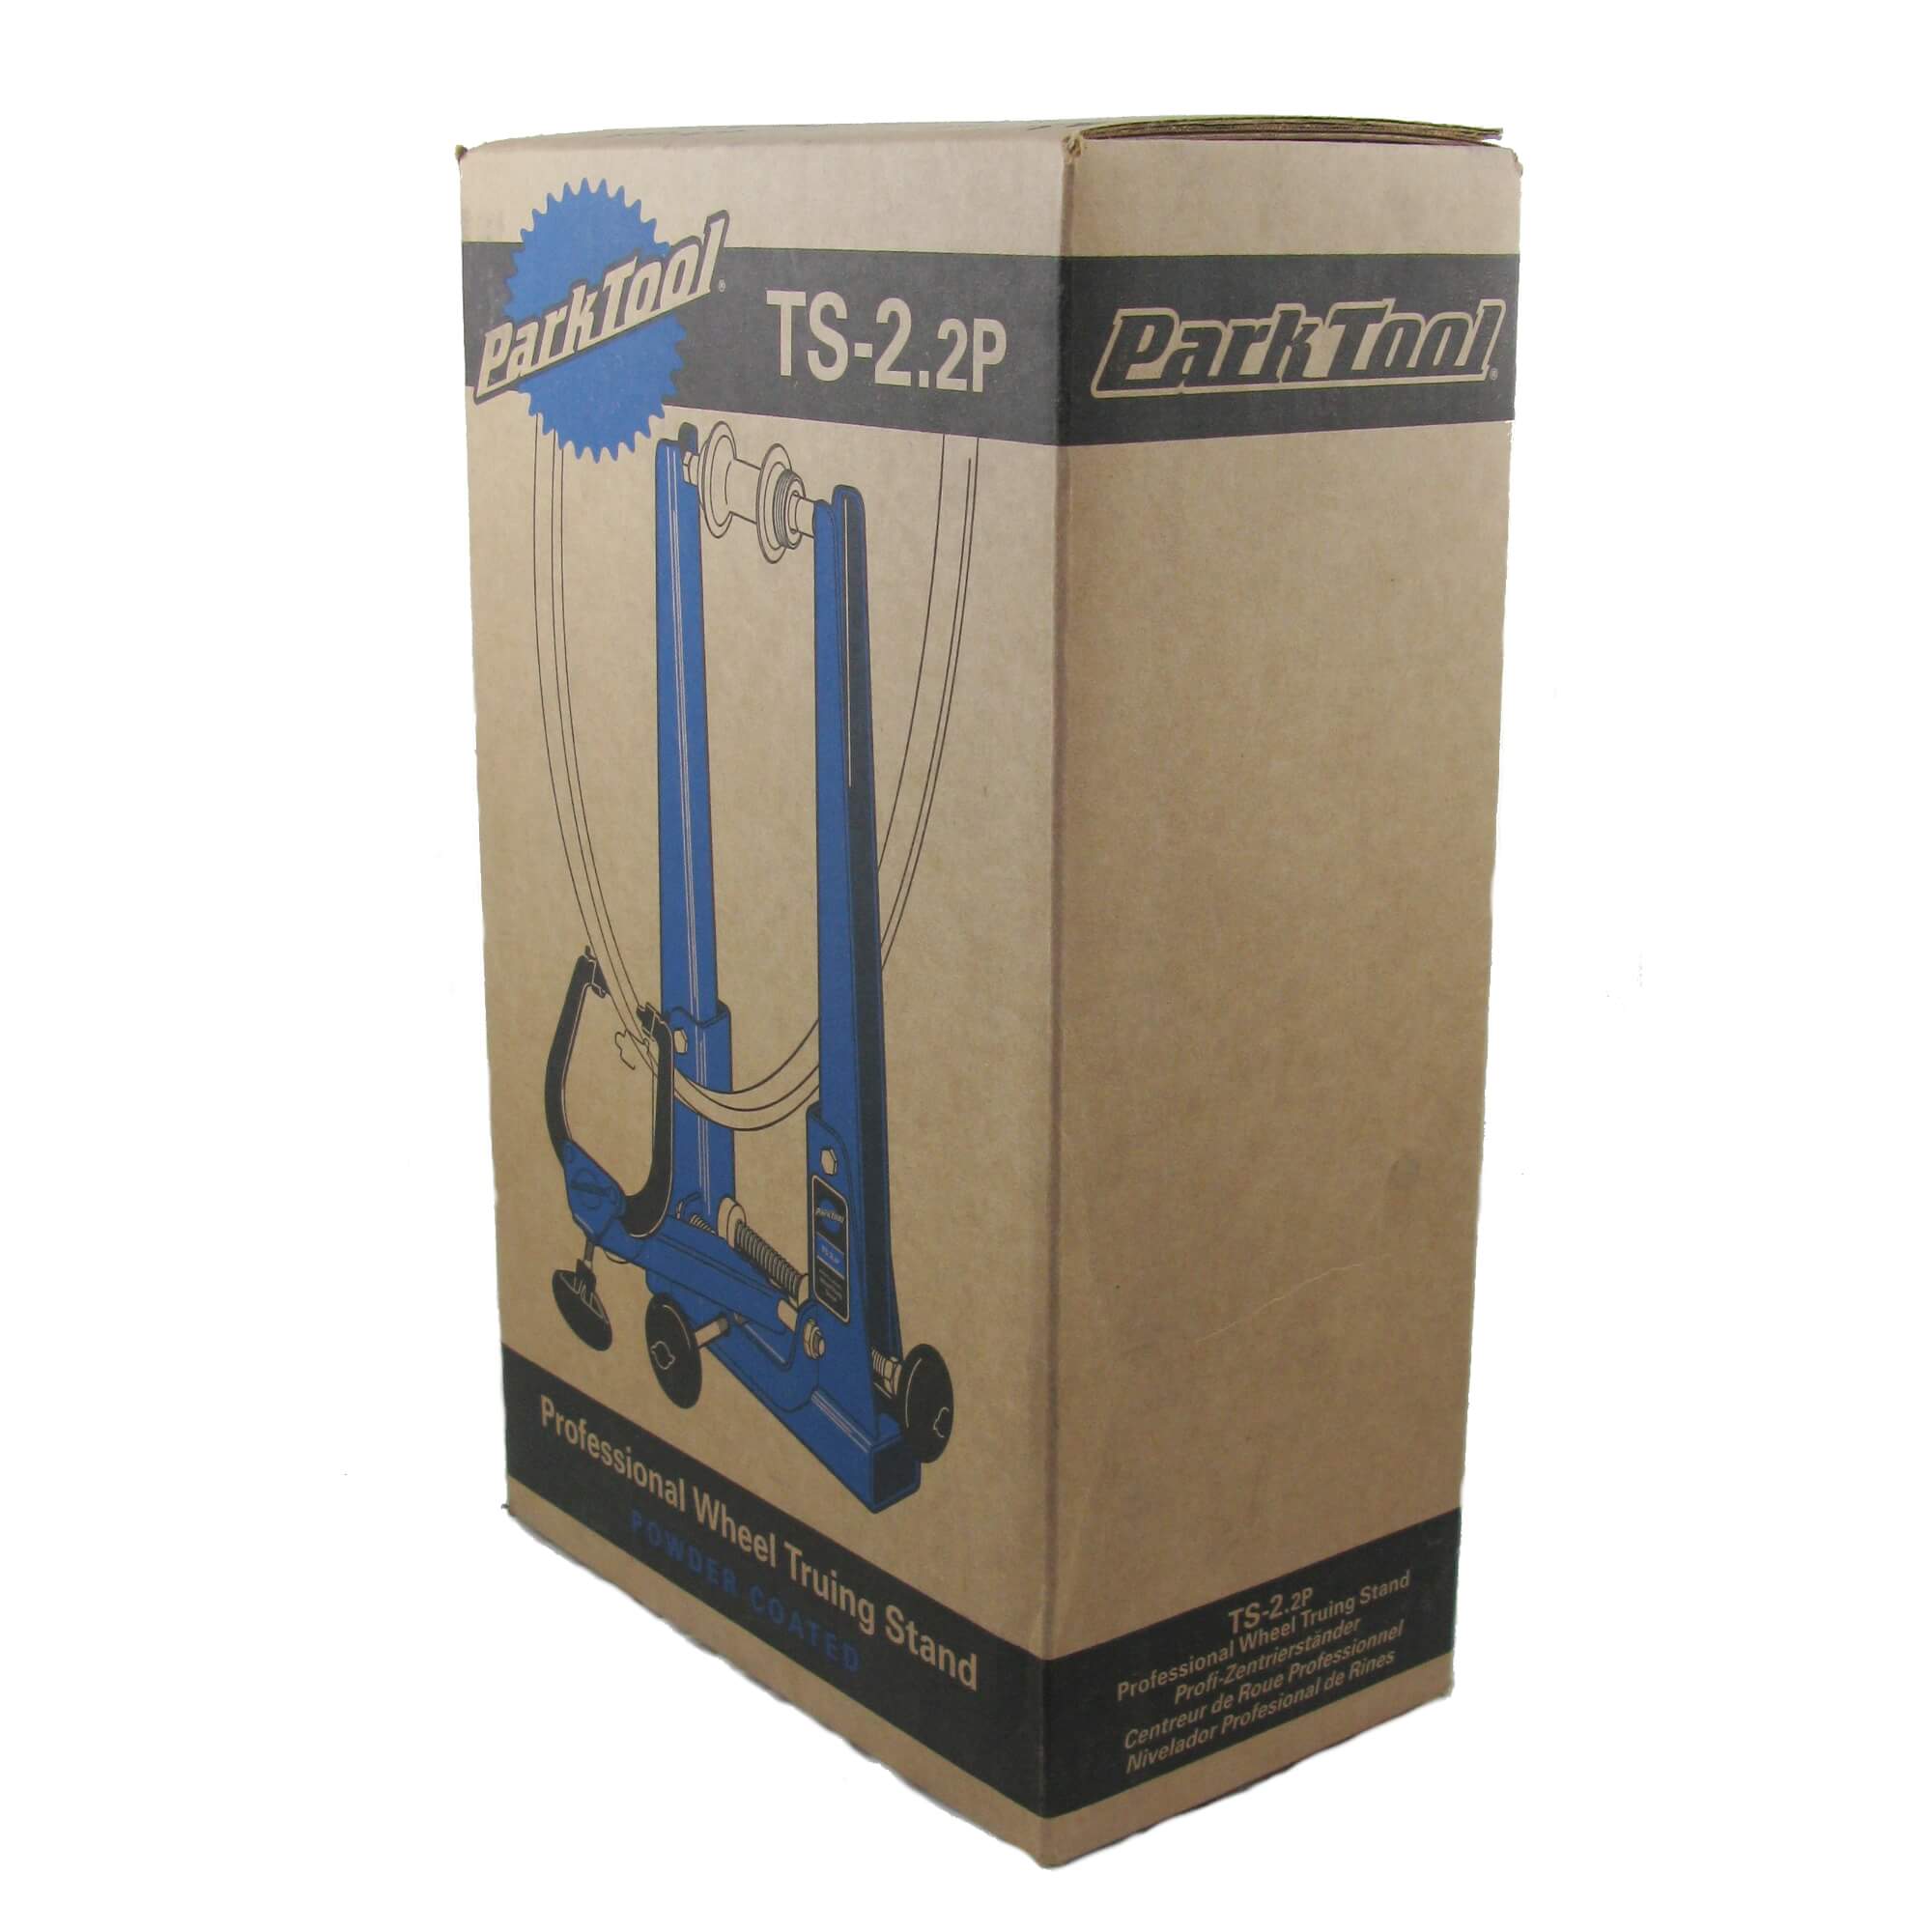 Park Tool TS-2.2p Truing Stand with TSB-2.2 Base.   Photo shows the packaging of the stand.